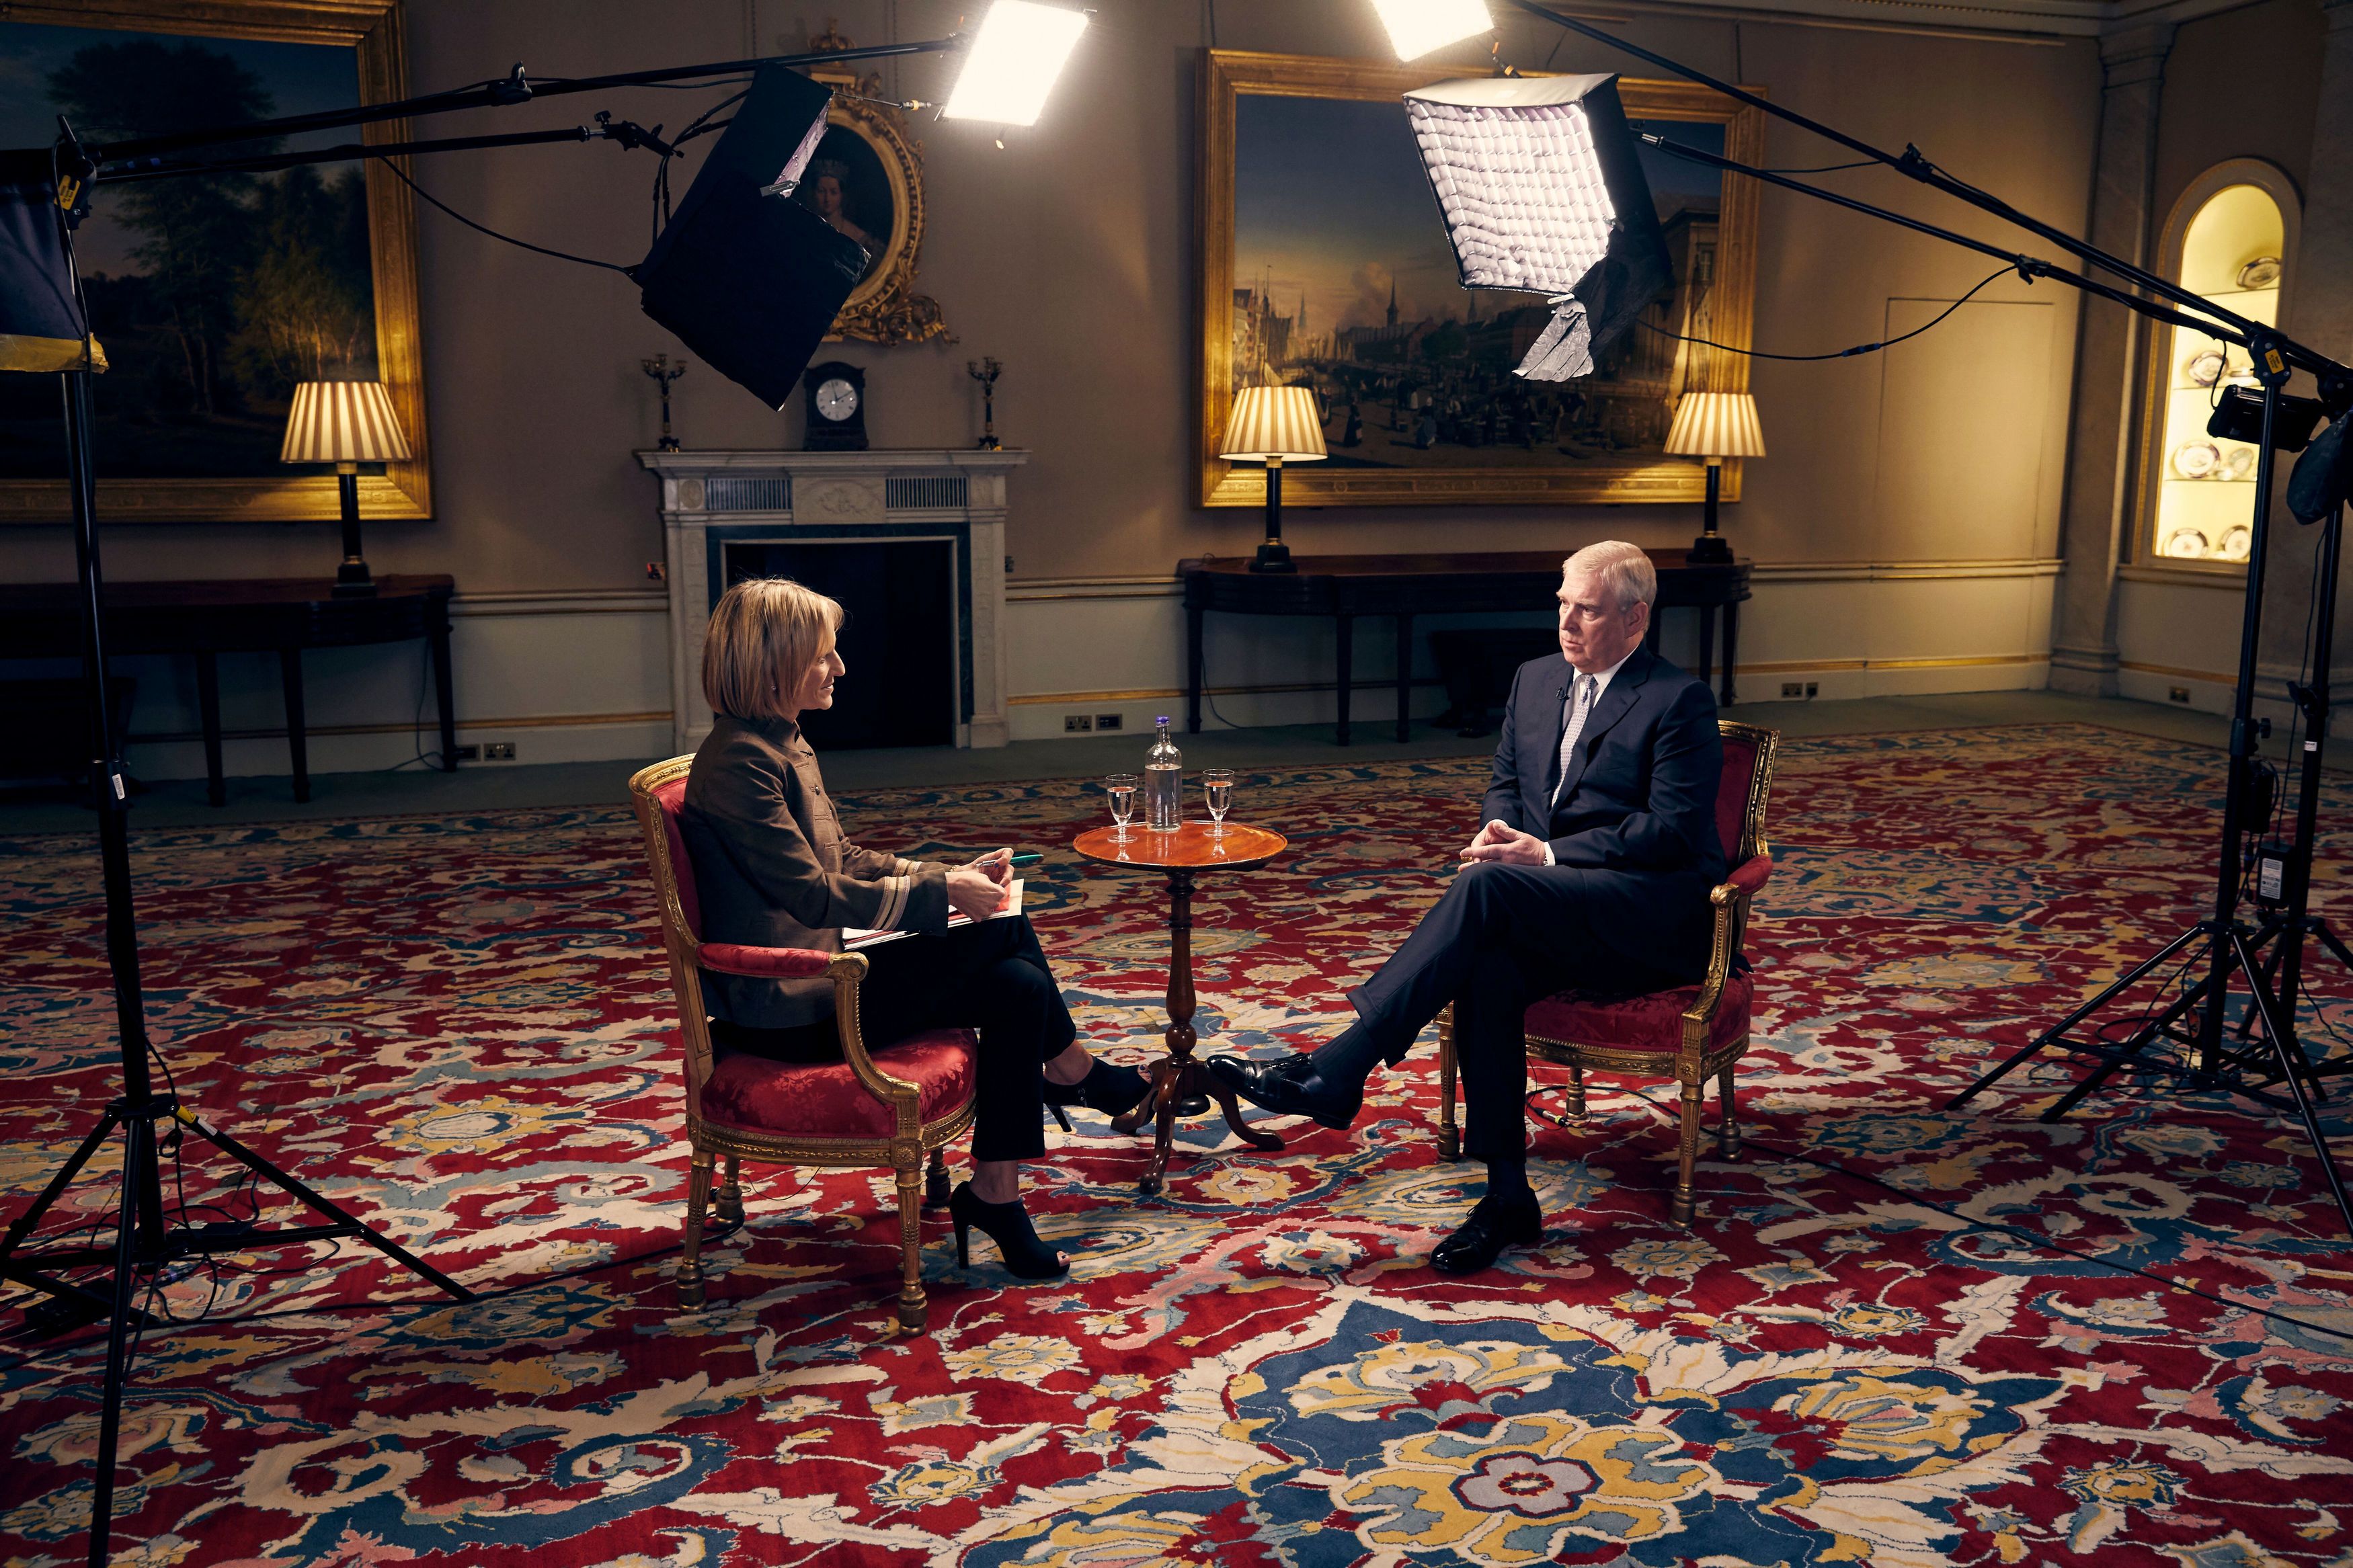  Prince Andrew stepped down as a senior royal after a disastrous Newsnight interview